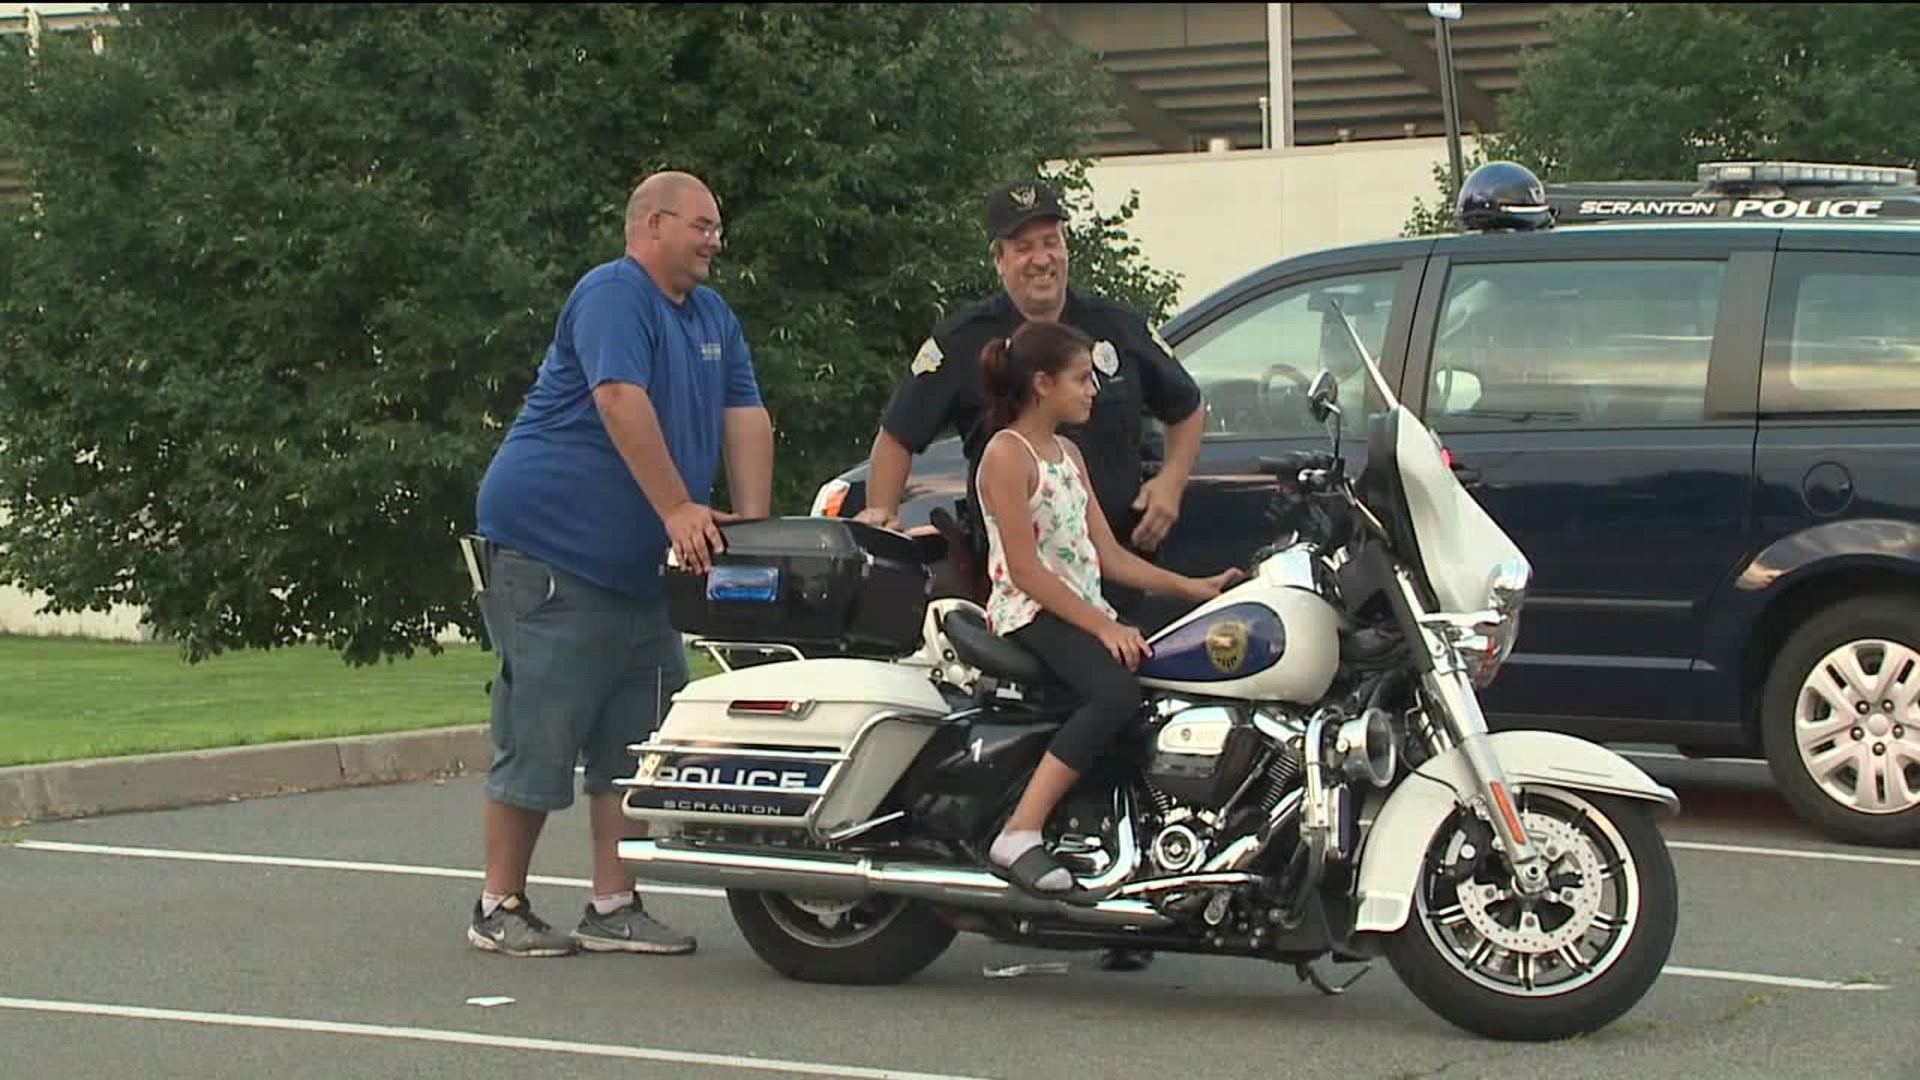 Scranton Police Have a `Night Out` with the Community